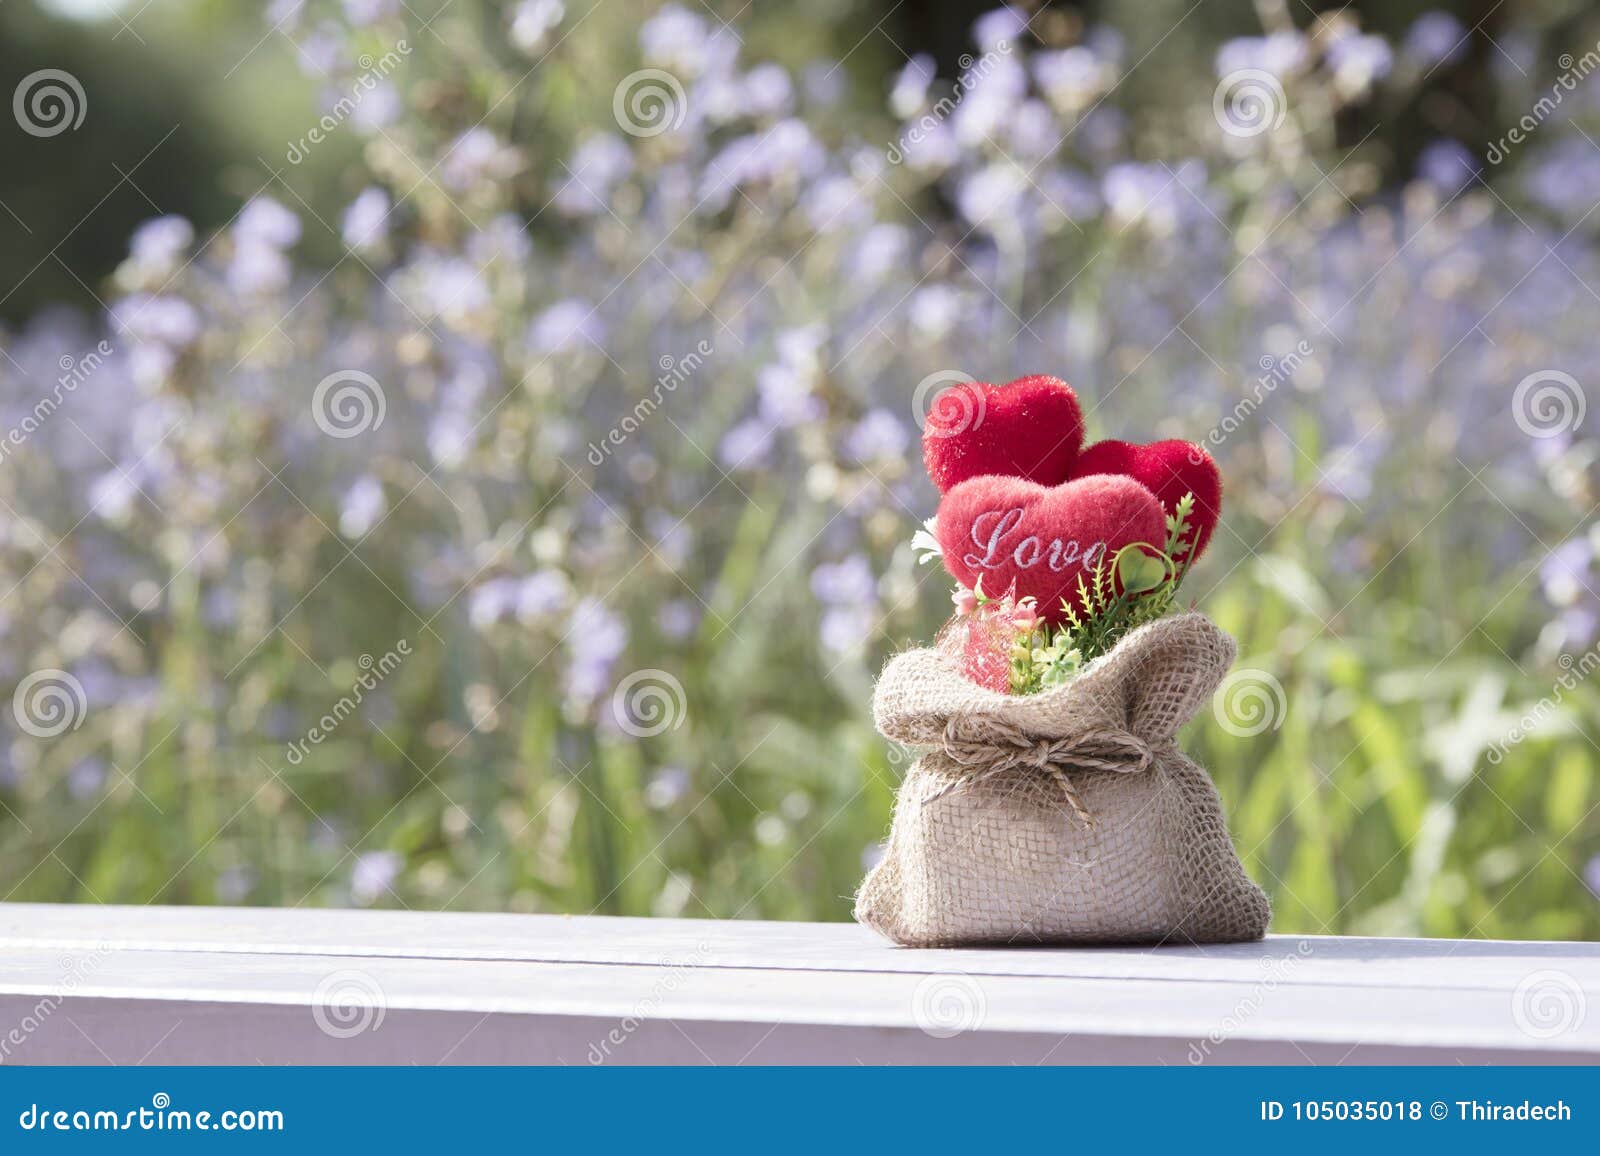 Head in Love in Valentine Natural Stock Photo - Image of nature, 105035018